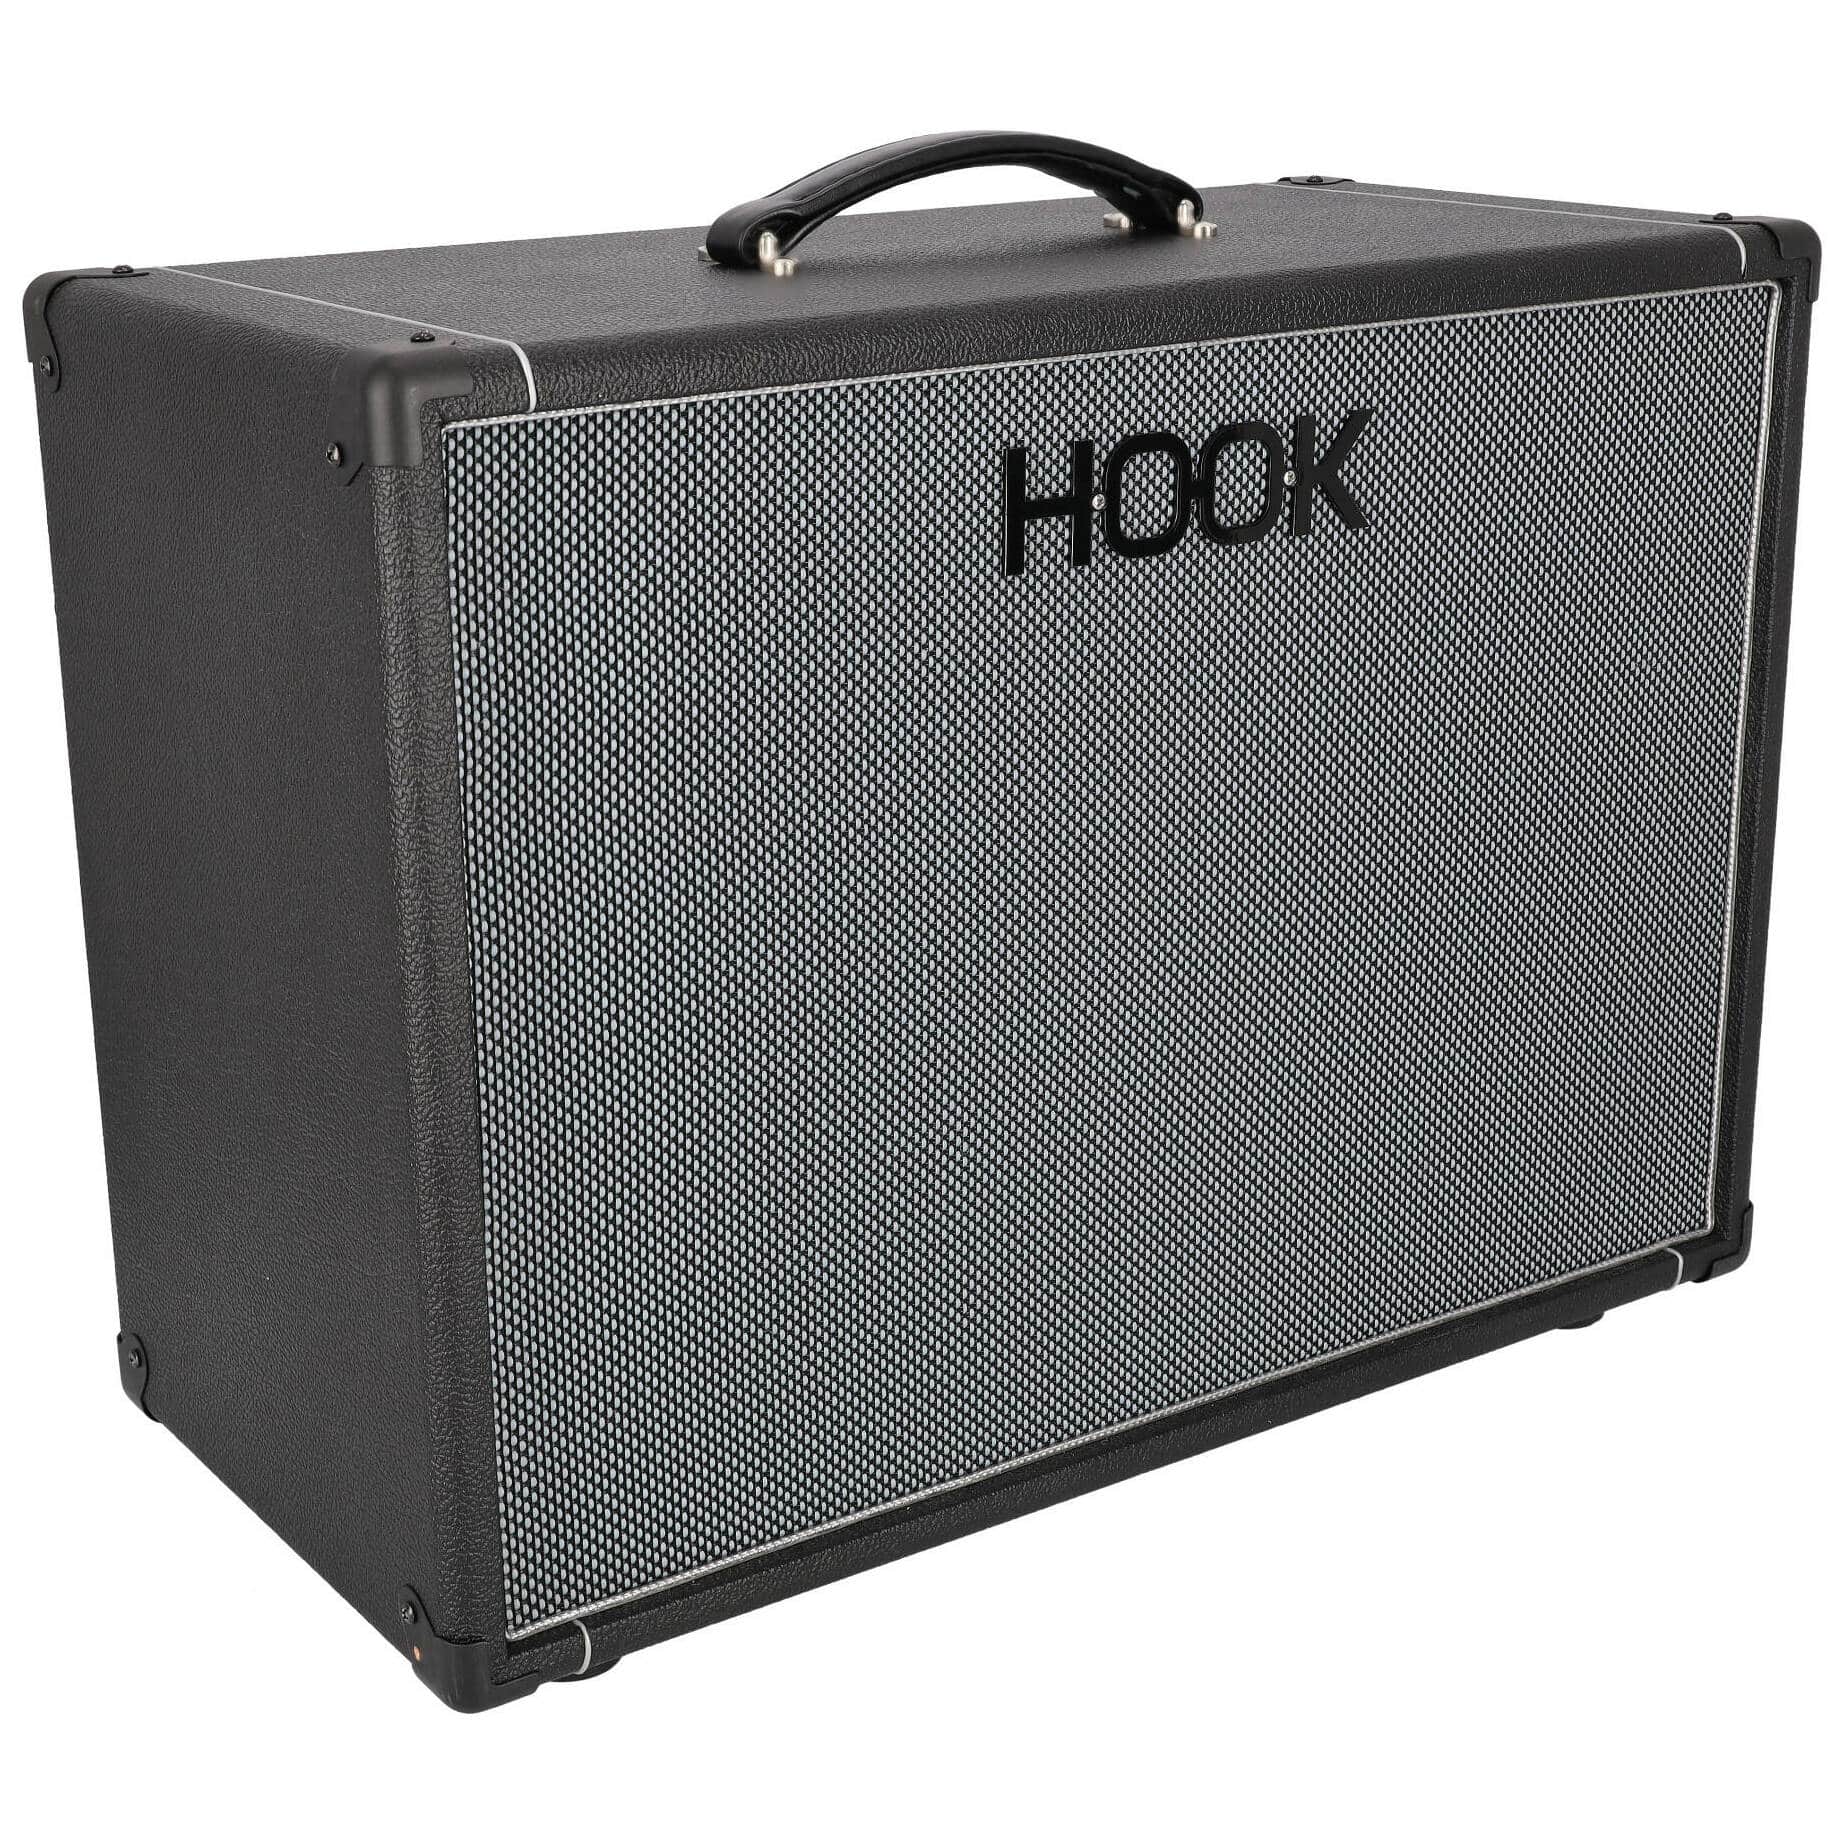 Hook Amplification 1x12 Cabinet WGS Oval Black